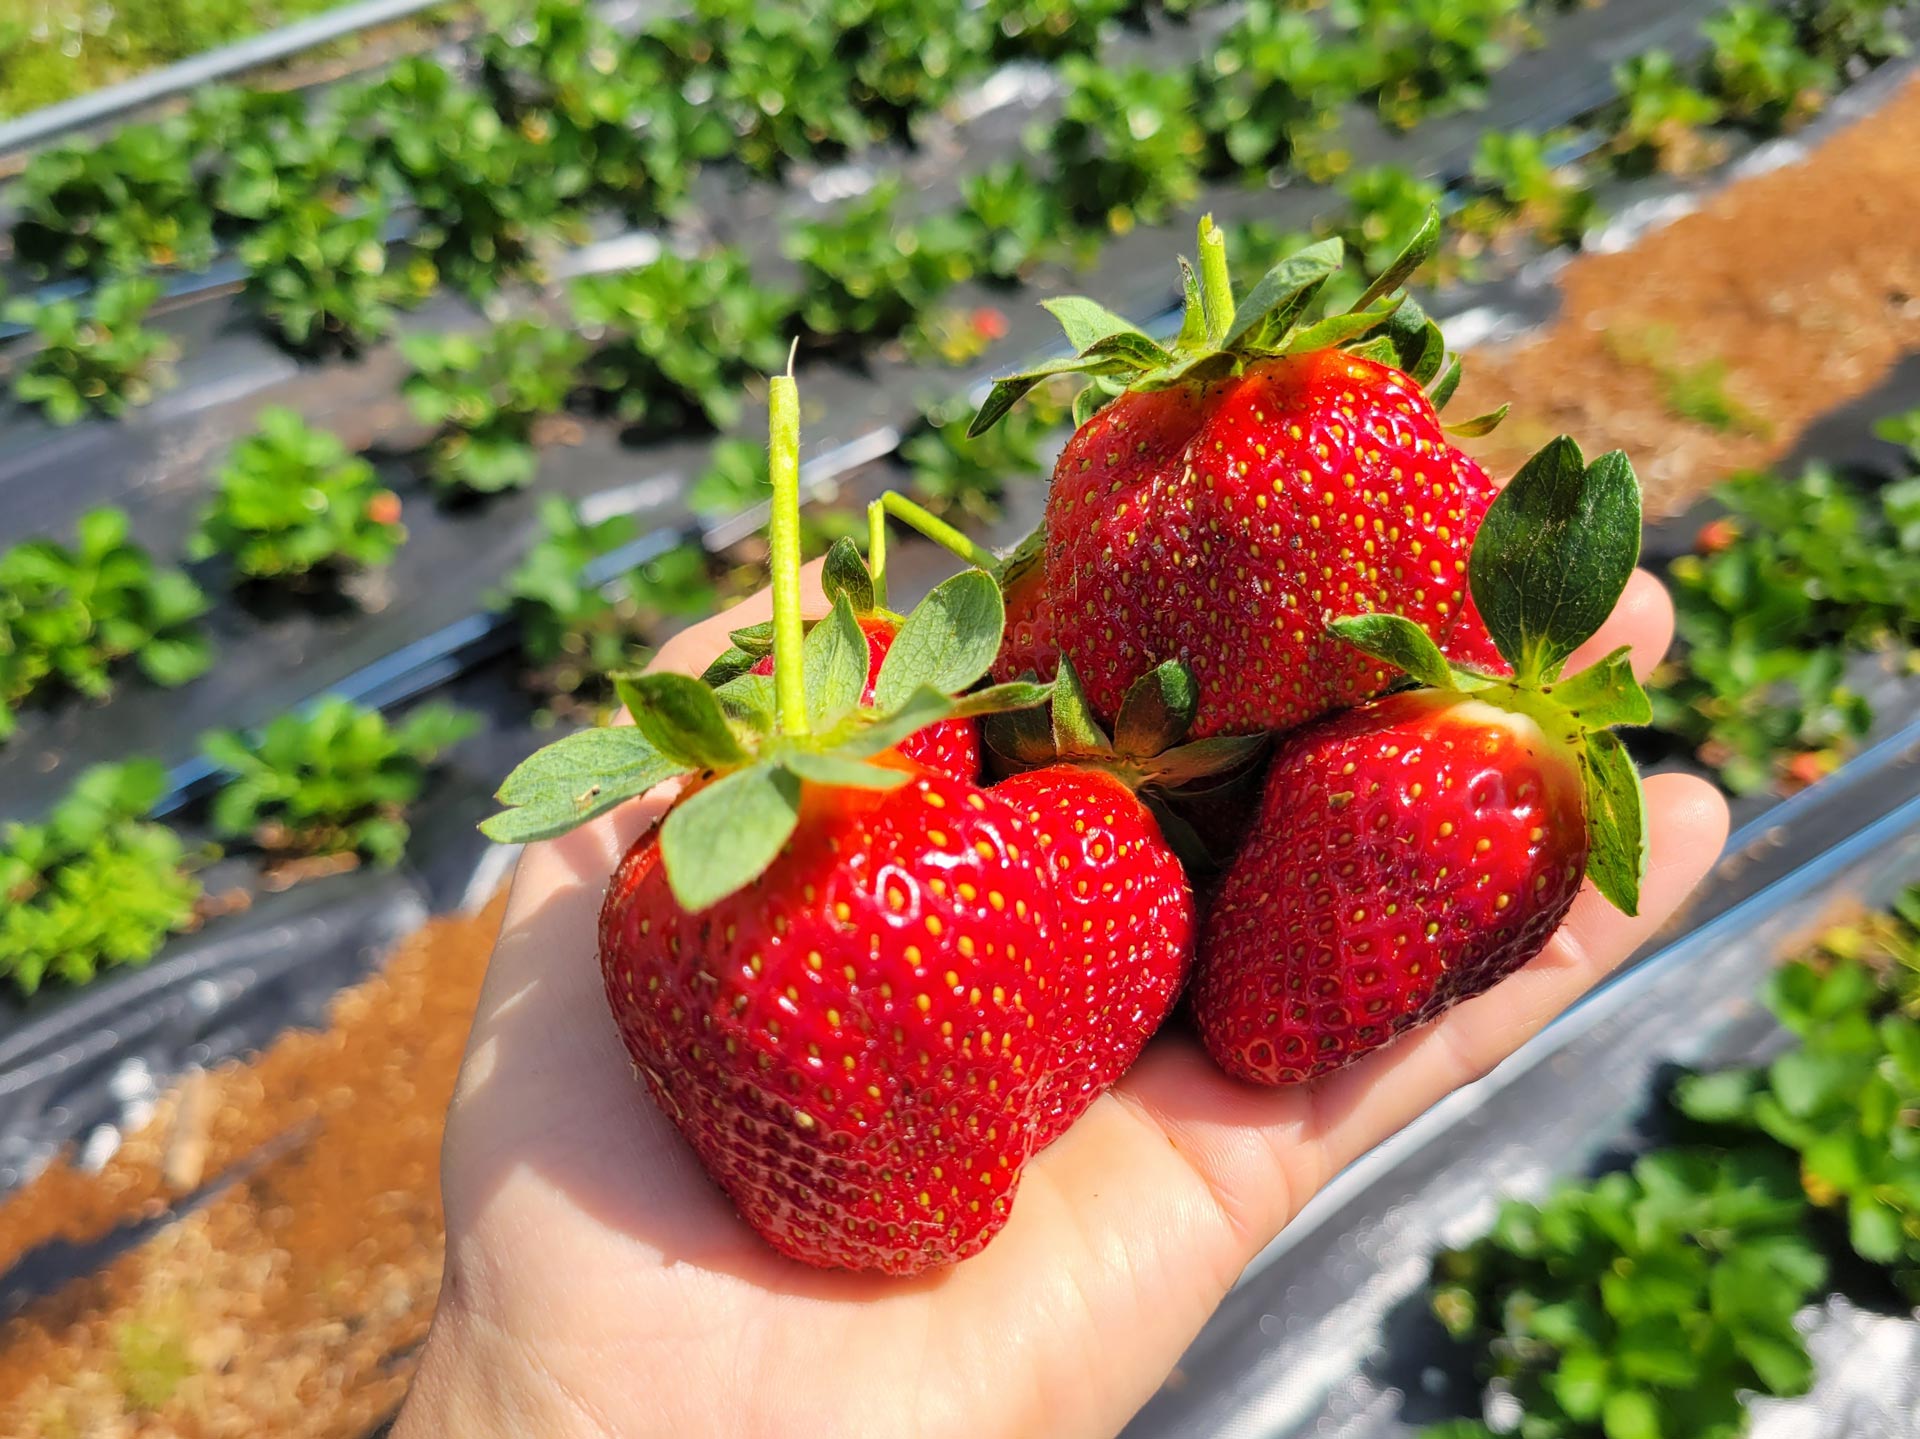 large strawberries being held in-hand in the field